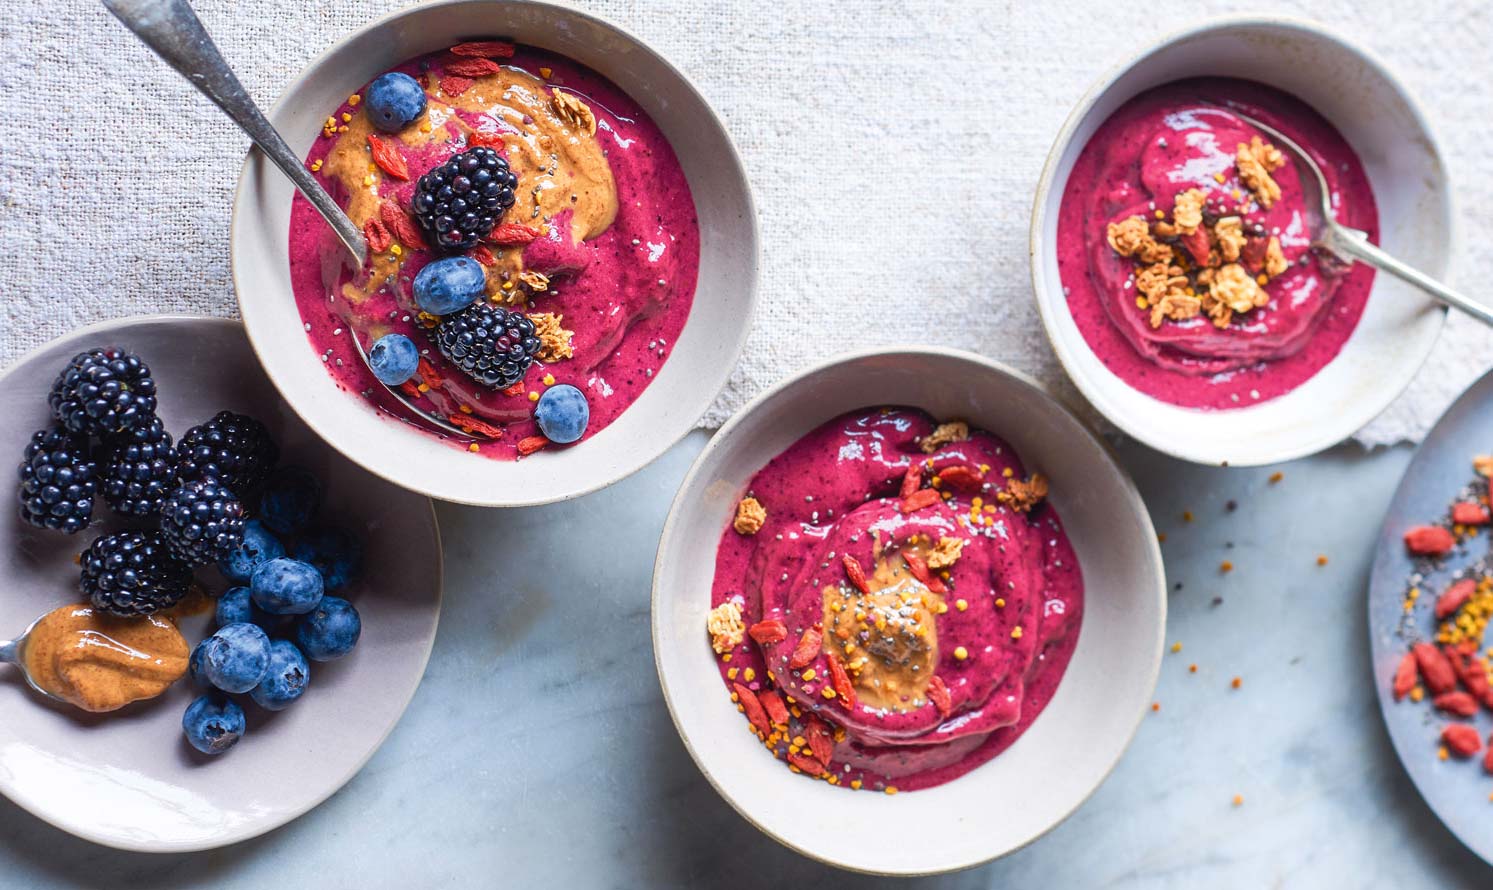 Say “Yum” Or “Yuck” to These Trendy Foods to Find Out What People Hate Most About You Acai Bowls